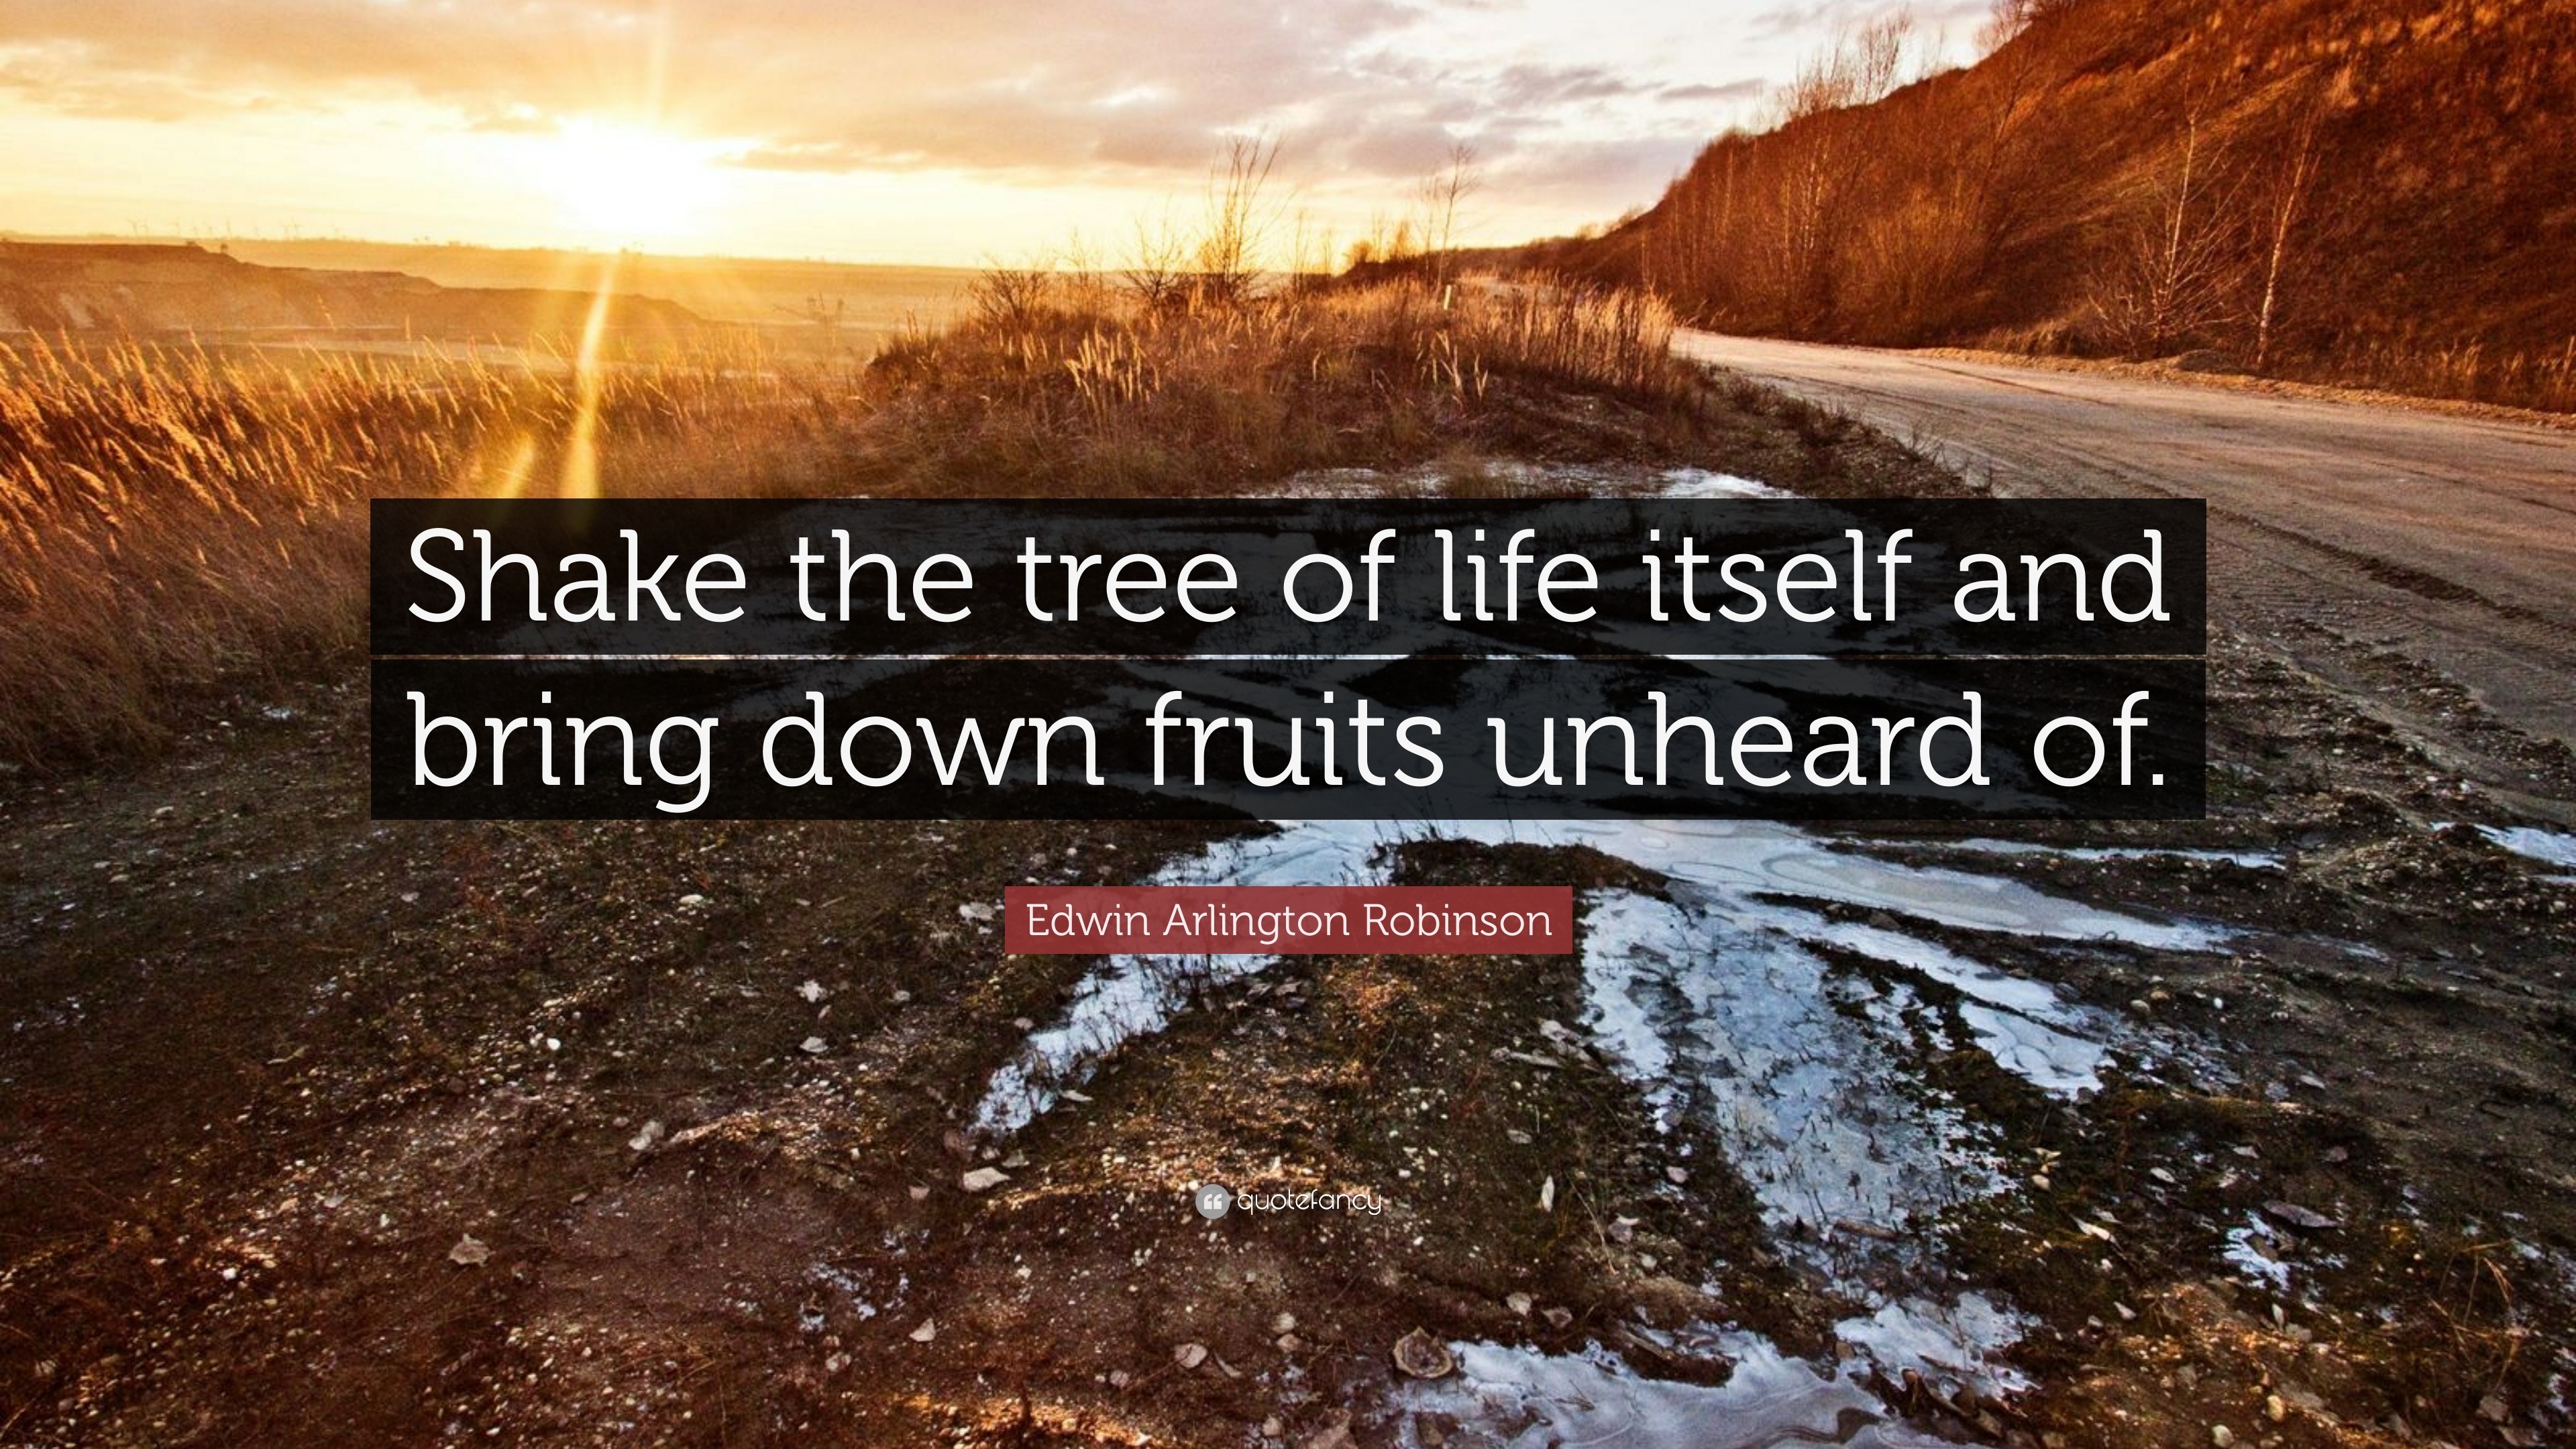 Edwin Arlington Robinson Quote “Shake the tree of life itself and bring down fruits